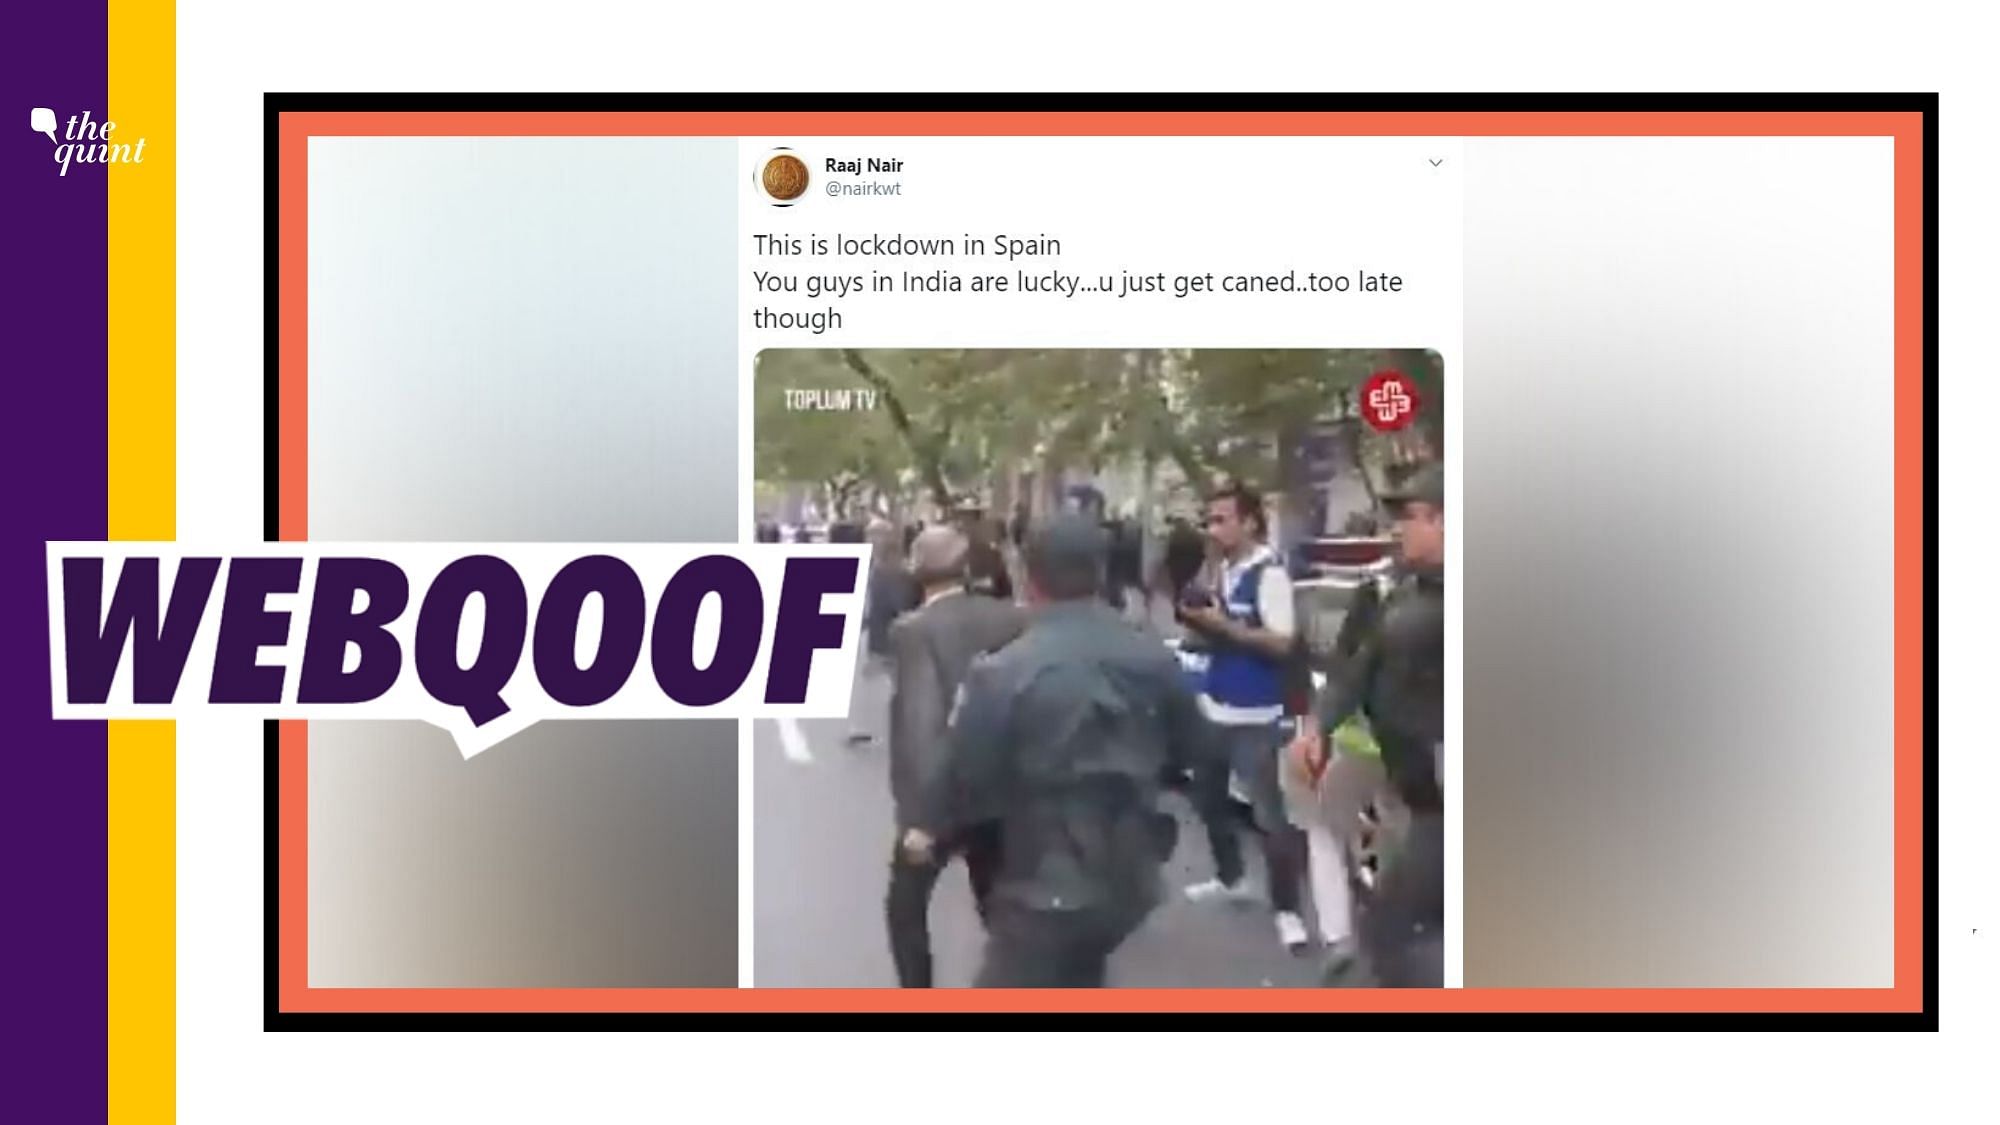 A video of police detaining people is being circulated on social media with a claim that it shows the situation of lockdown in Spain.